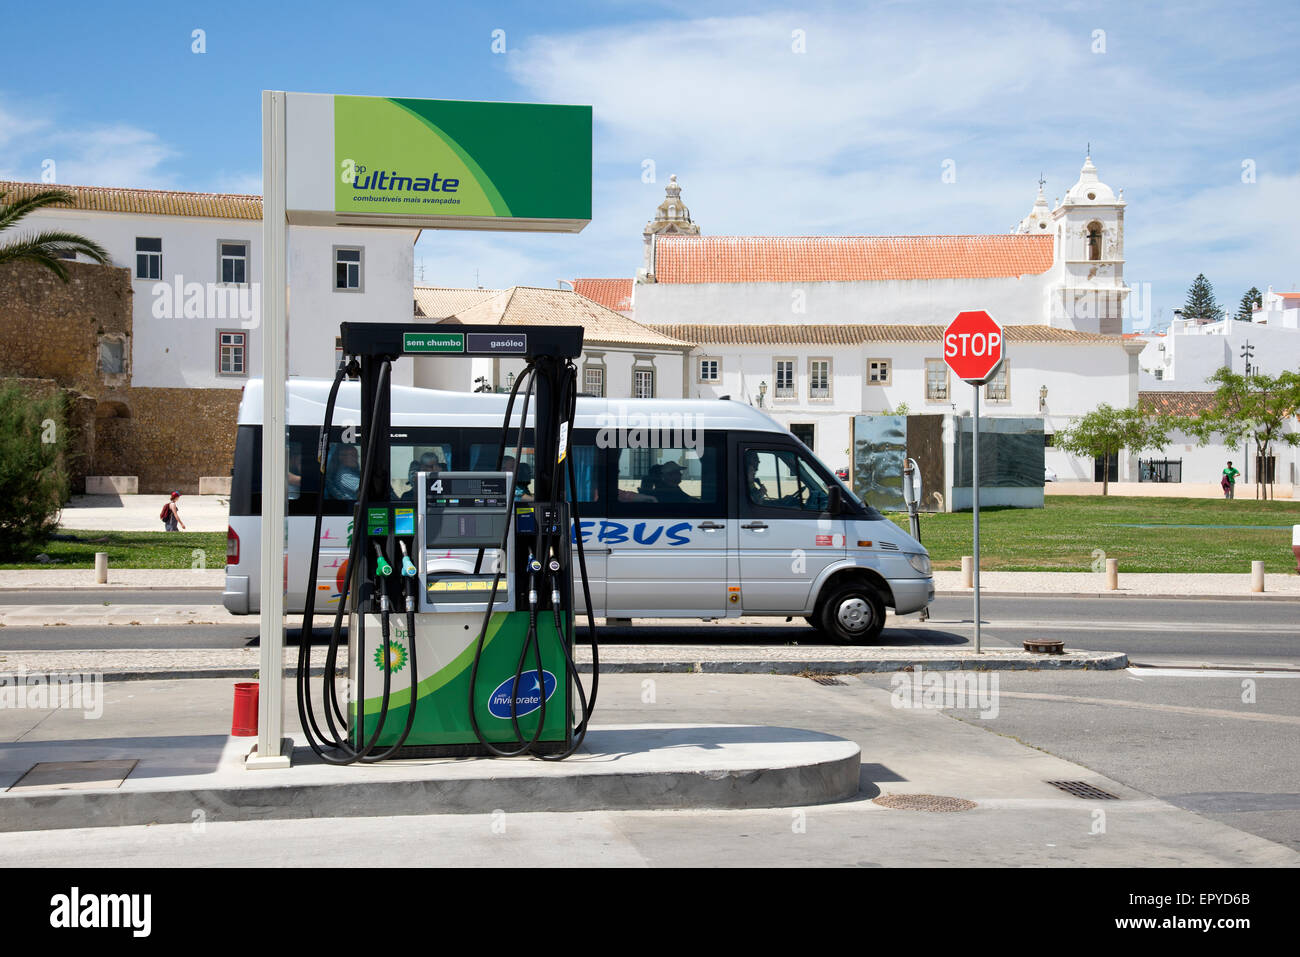 Petrol pump on the roadside in the historic town of Lagos in the Algarve holiday region of Portugal Stock Photo